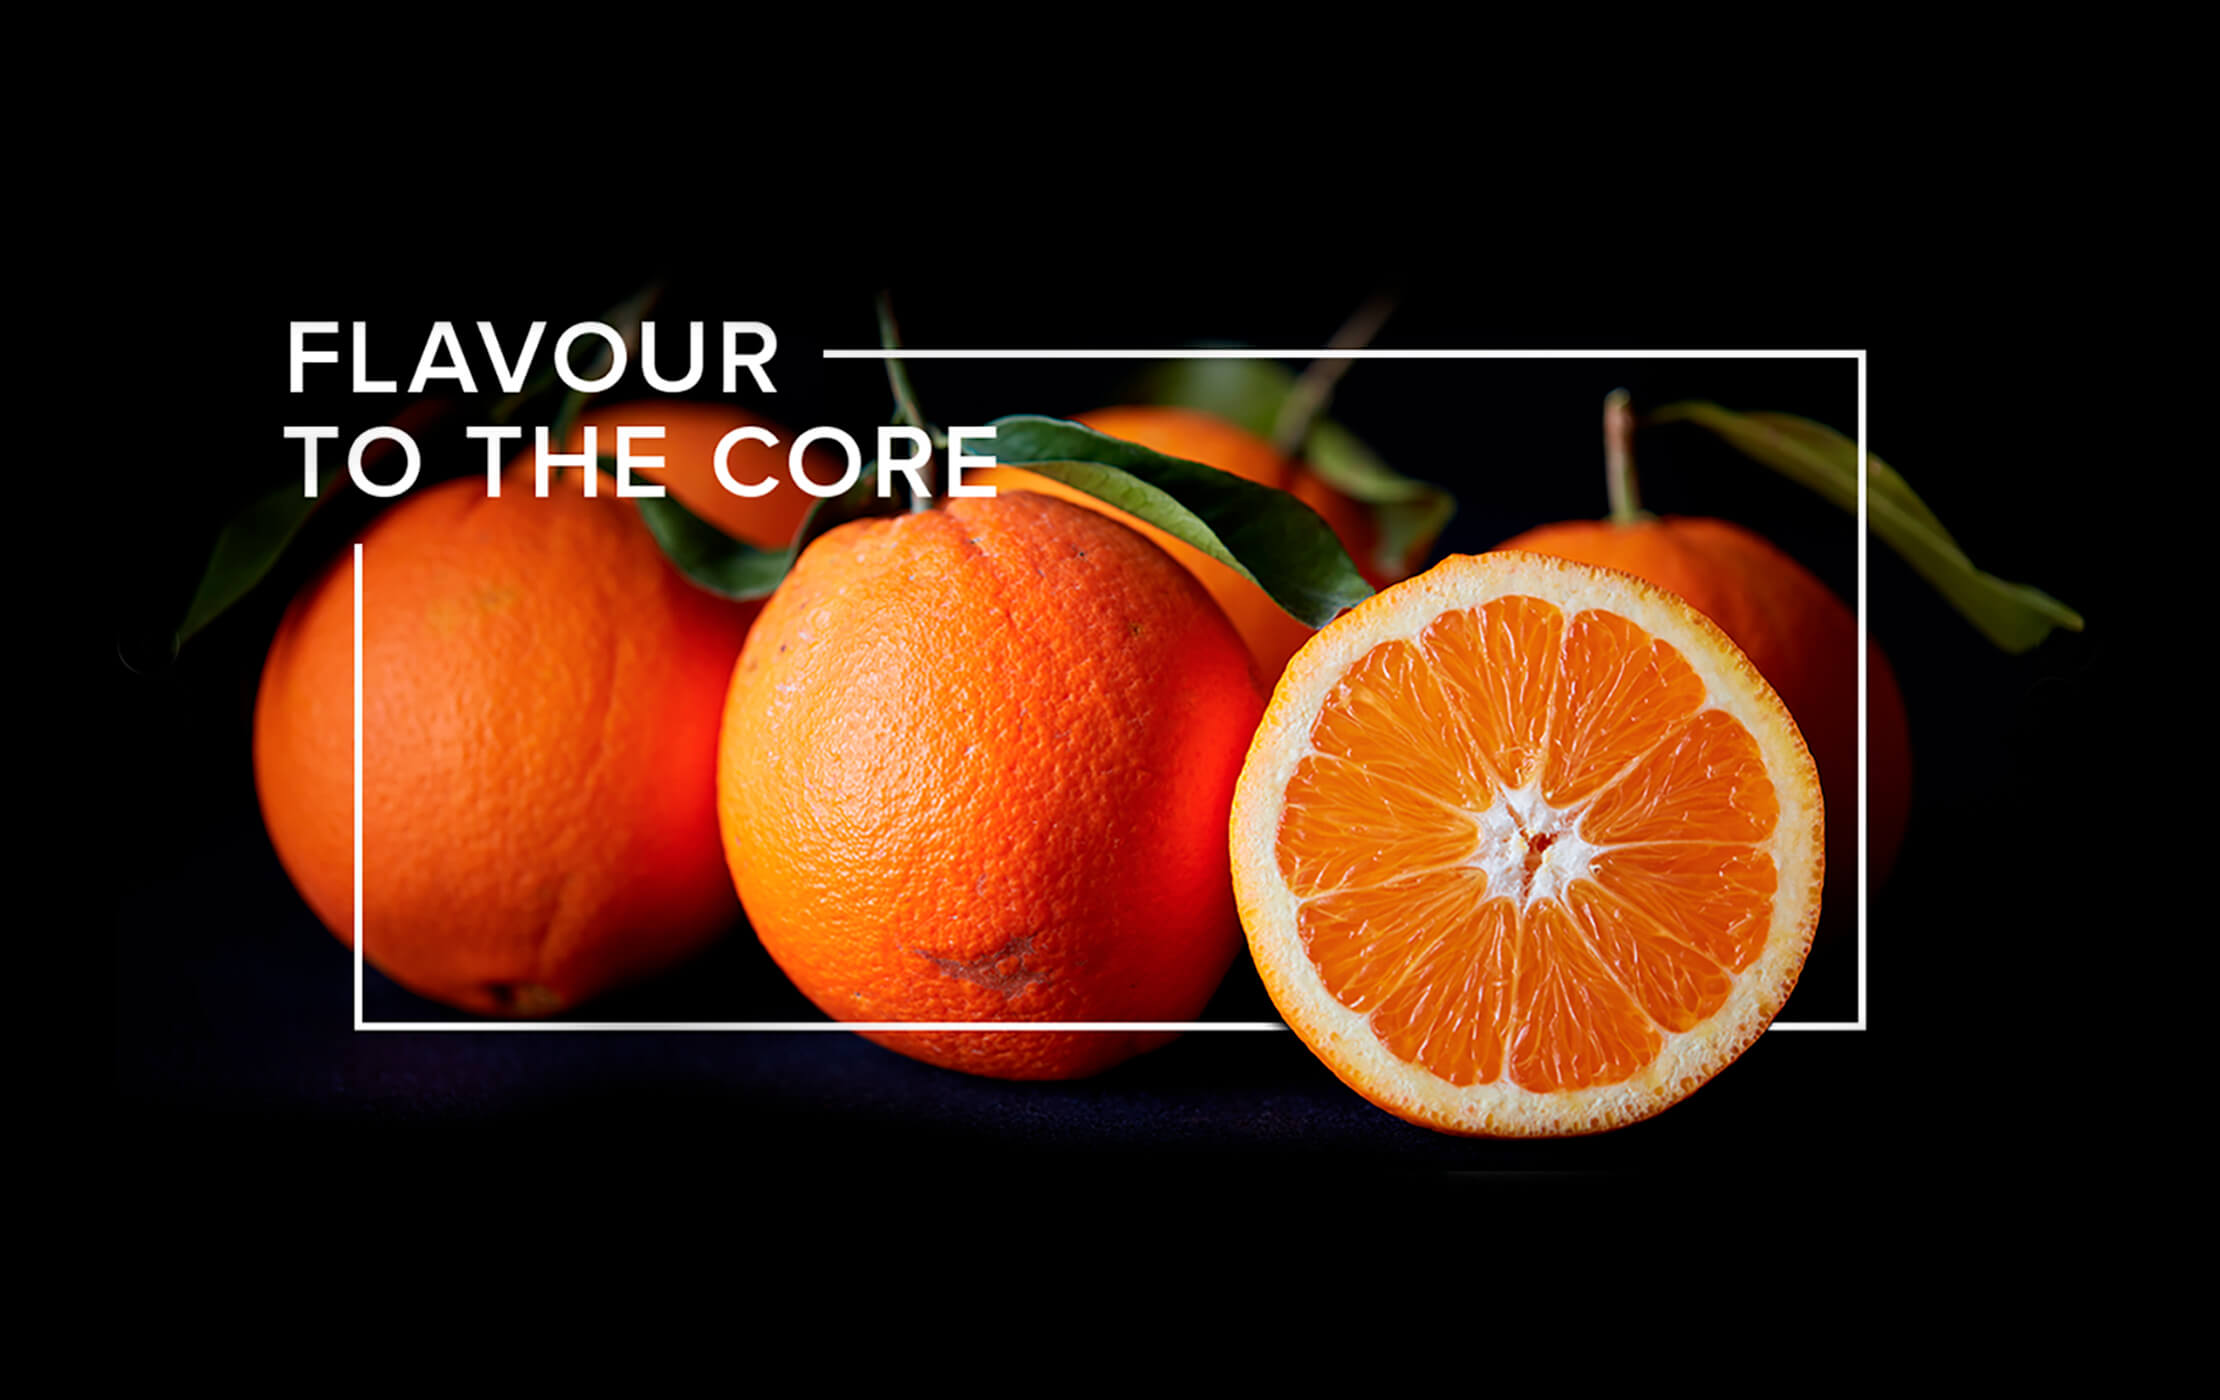 White 'Flavour to the Core' heading and rectangular frame on a black background, intertwined with oranges